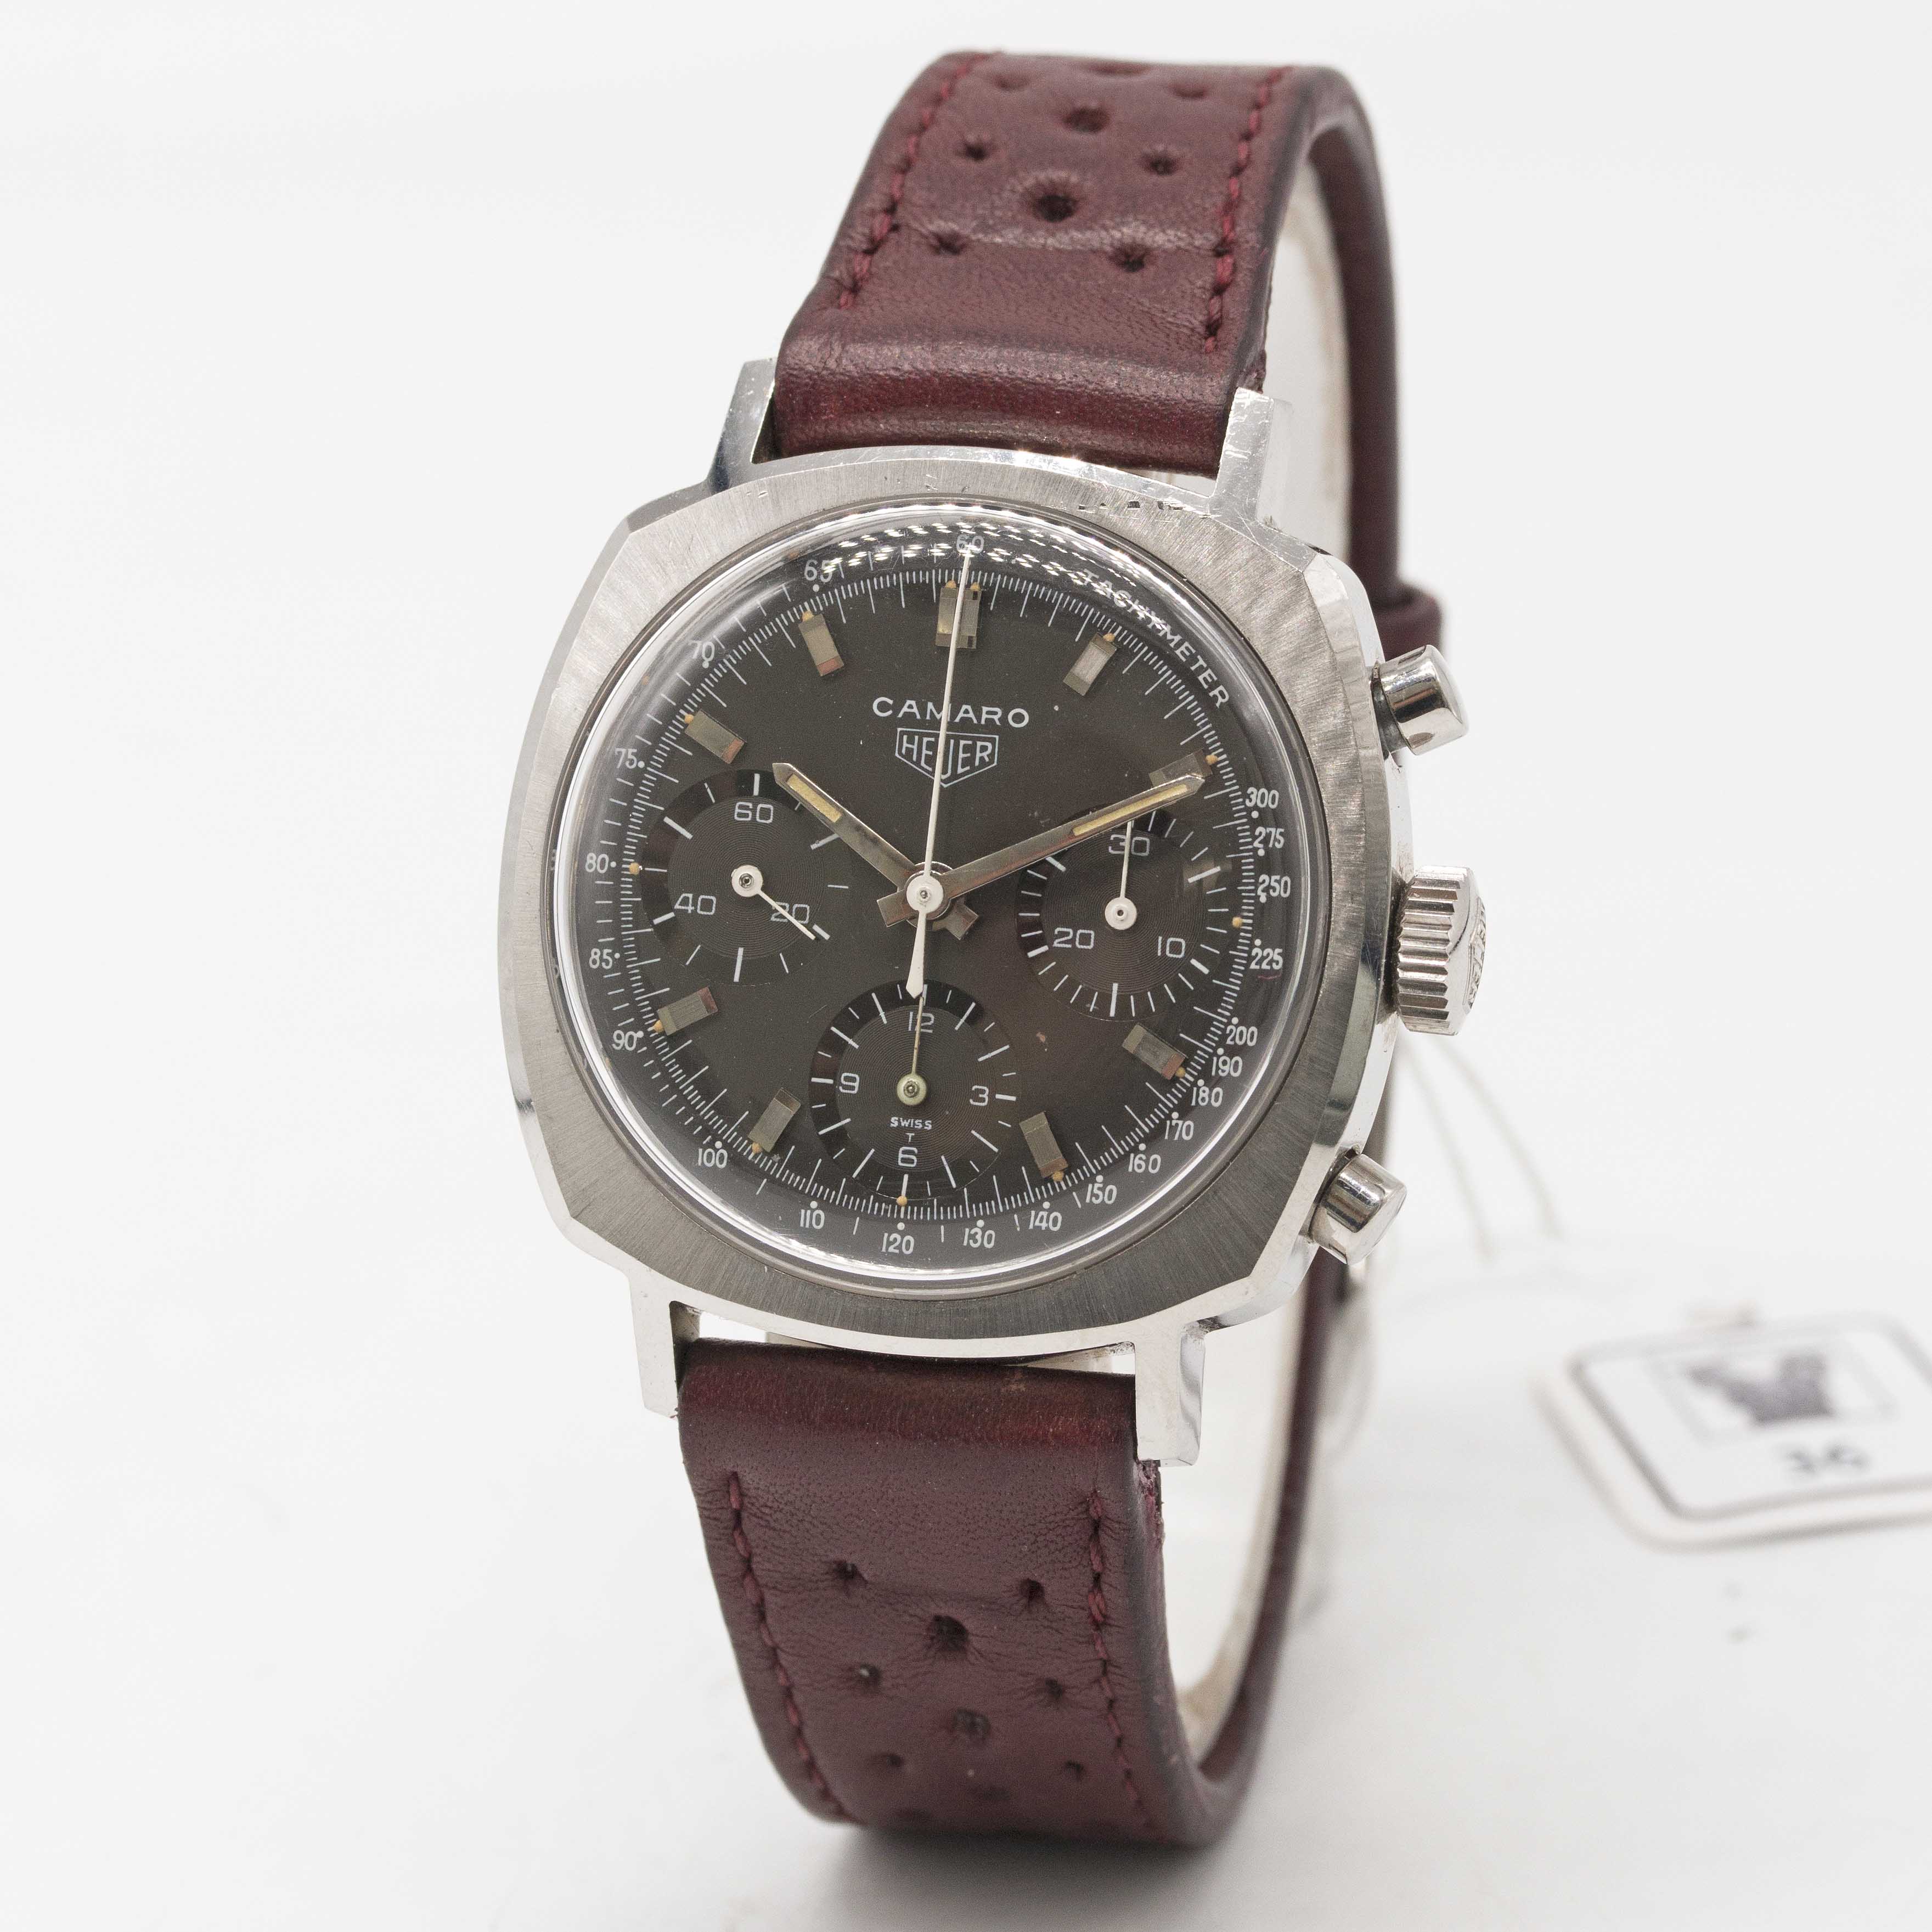 A GENTLEMAN'S STAINLESS STEEL HEUER CAMARO CHRONOGRAPH WRIST WATCH CIRCA 1960s, REF. 7220NT WITH - Image 4 of 9